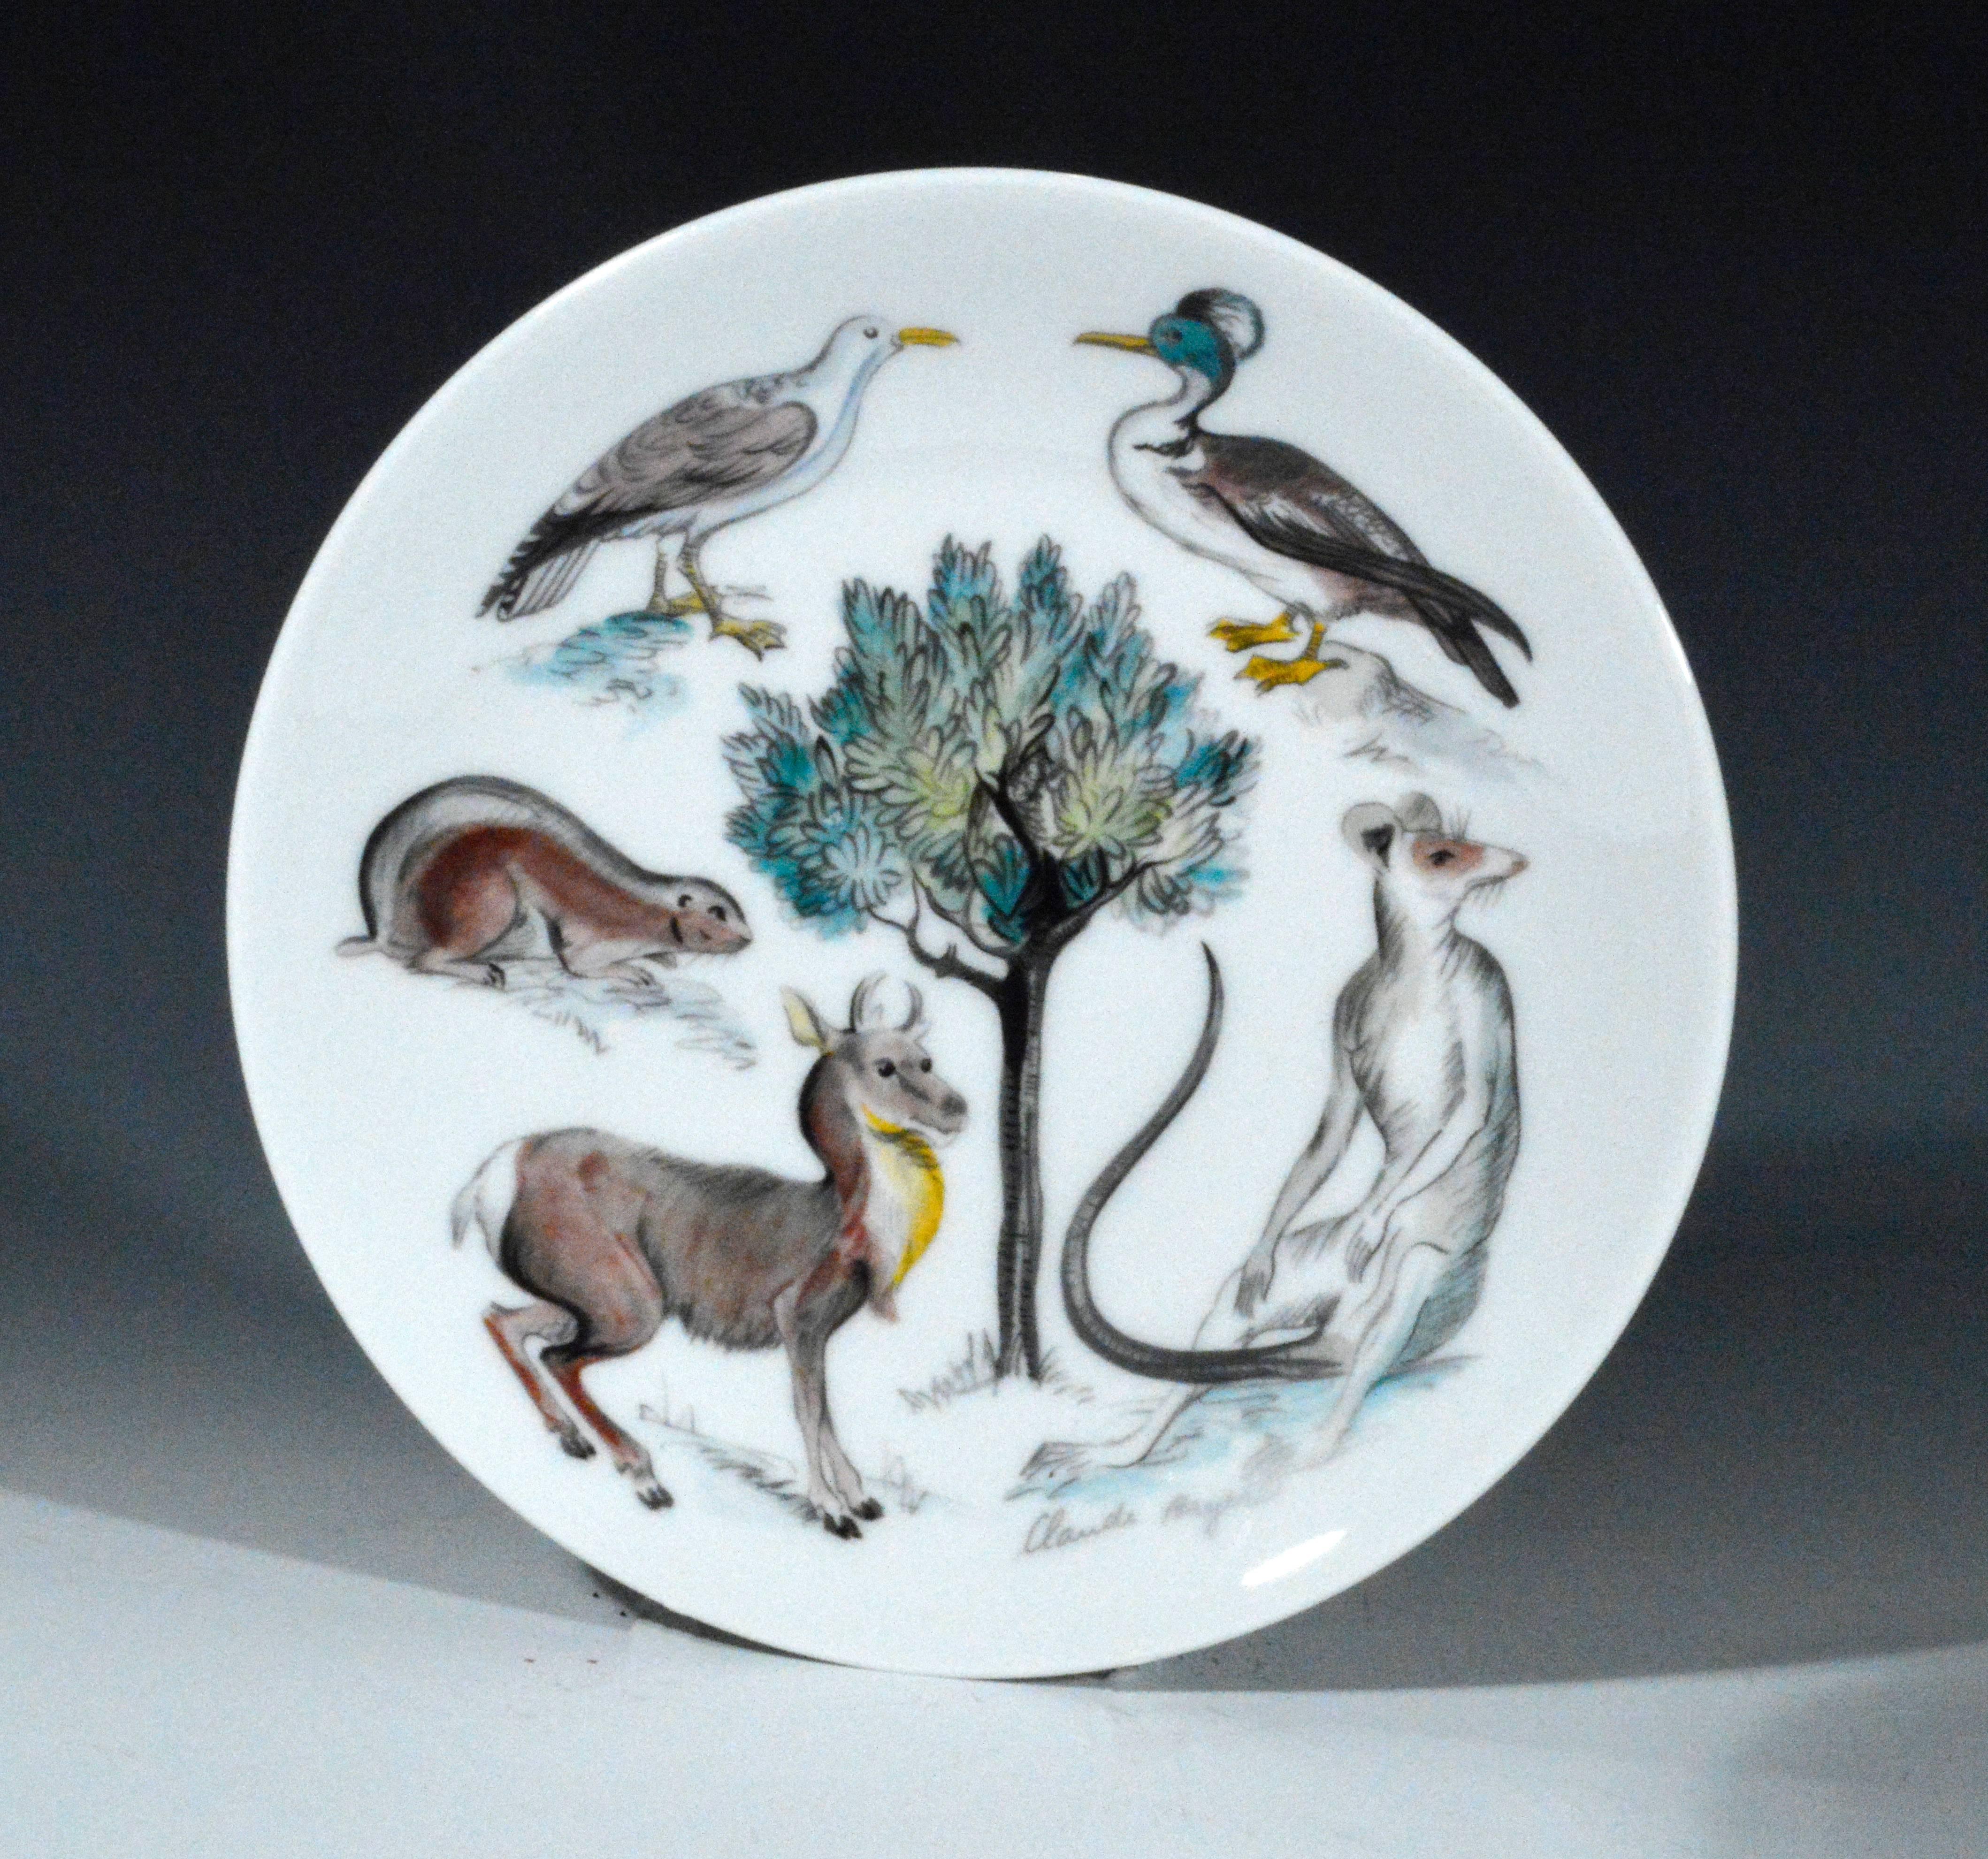 The Earthly Paradise Limoges plates from CH Field Havimand are signed by Claude Beyer and are numbered one through six.

This set is from the Biblical quote from Genesis 1-25- And God made the beast of the earth after his kind and cattle after